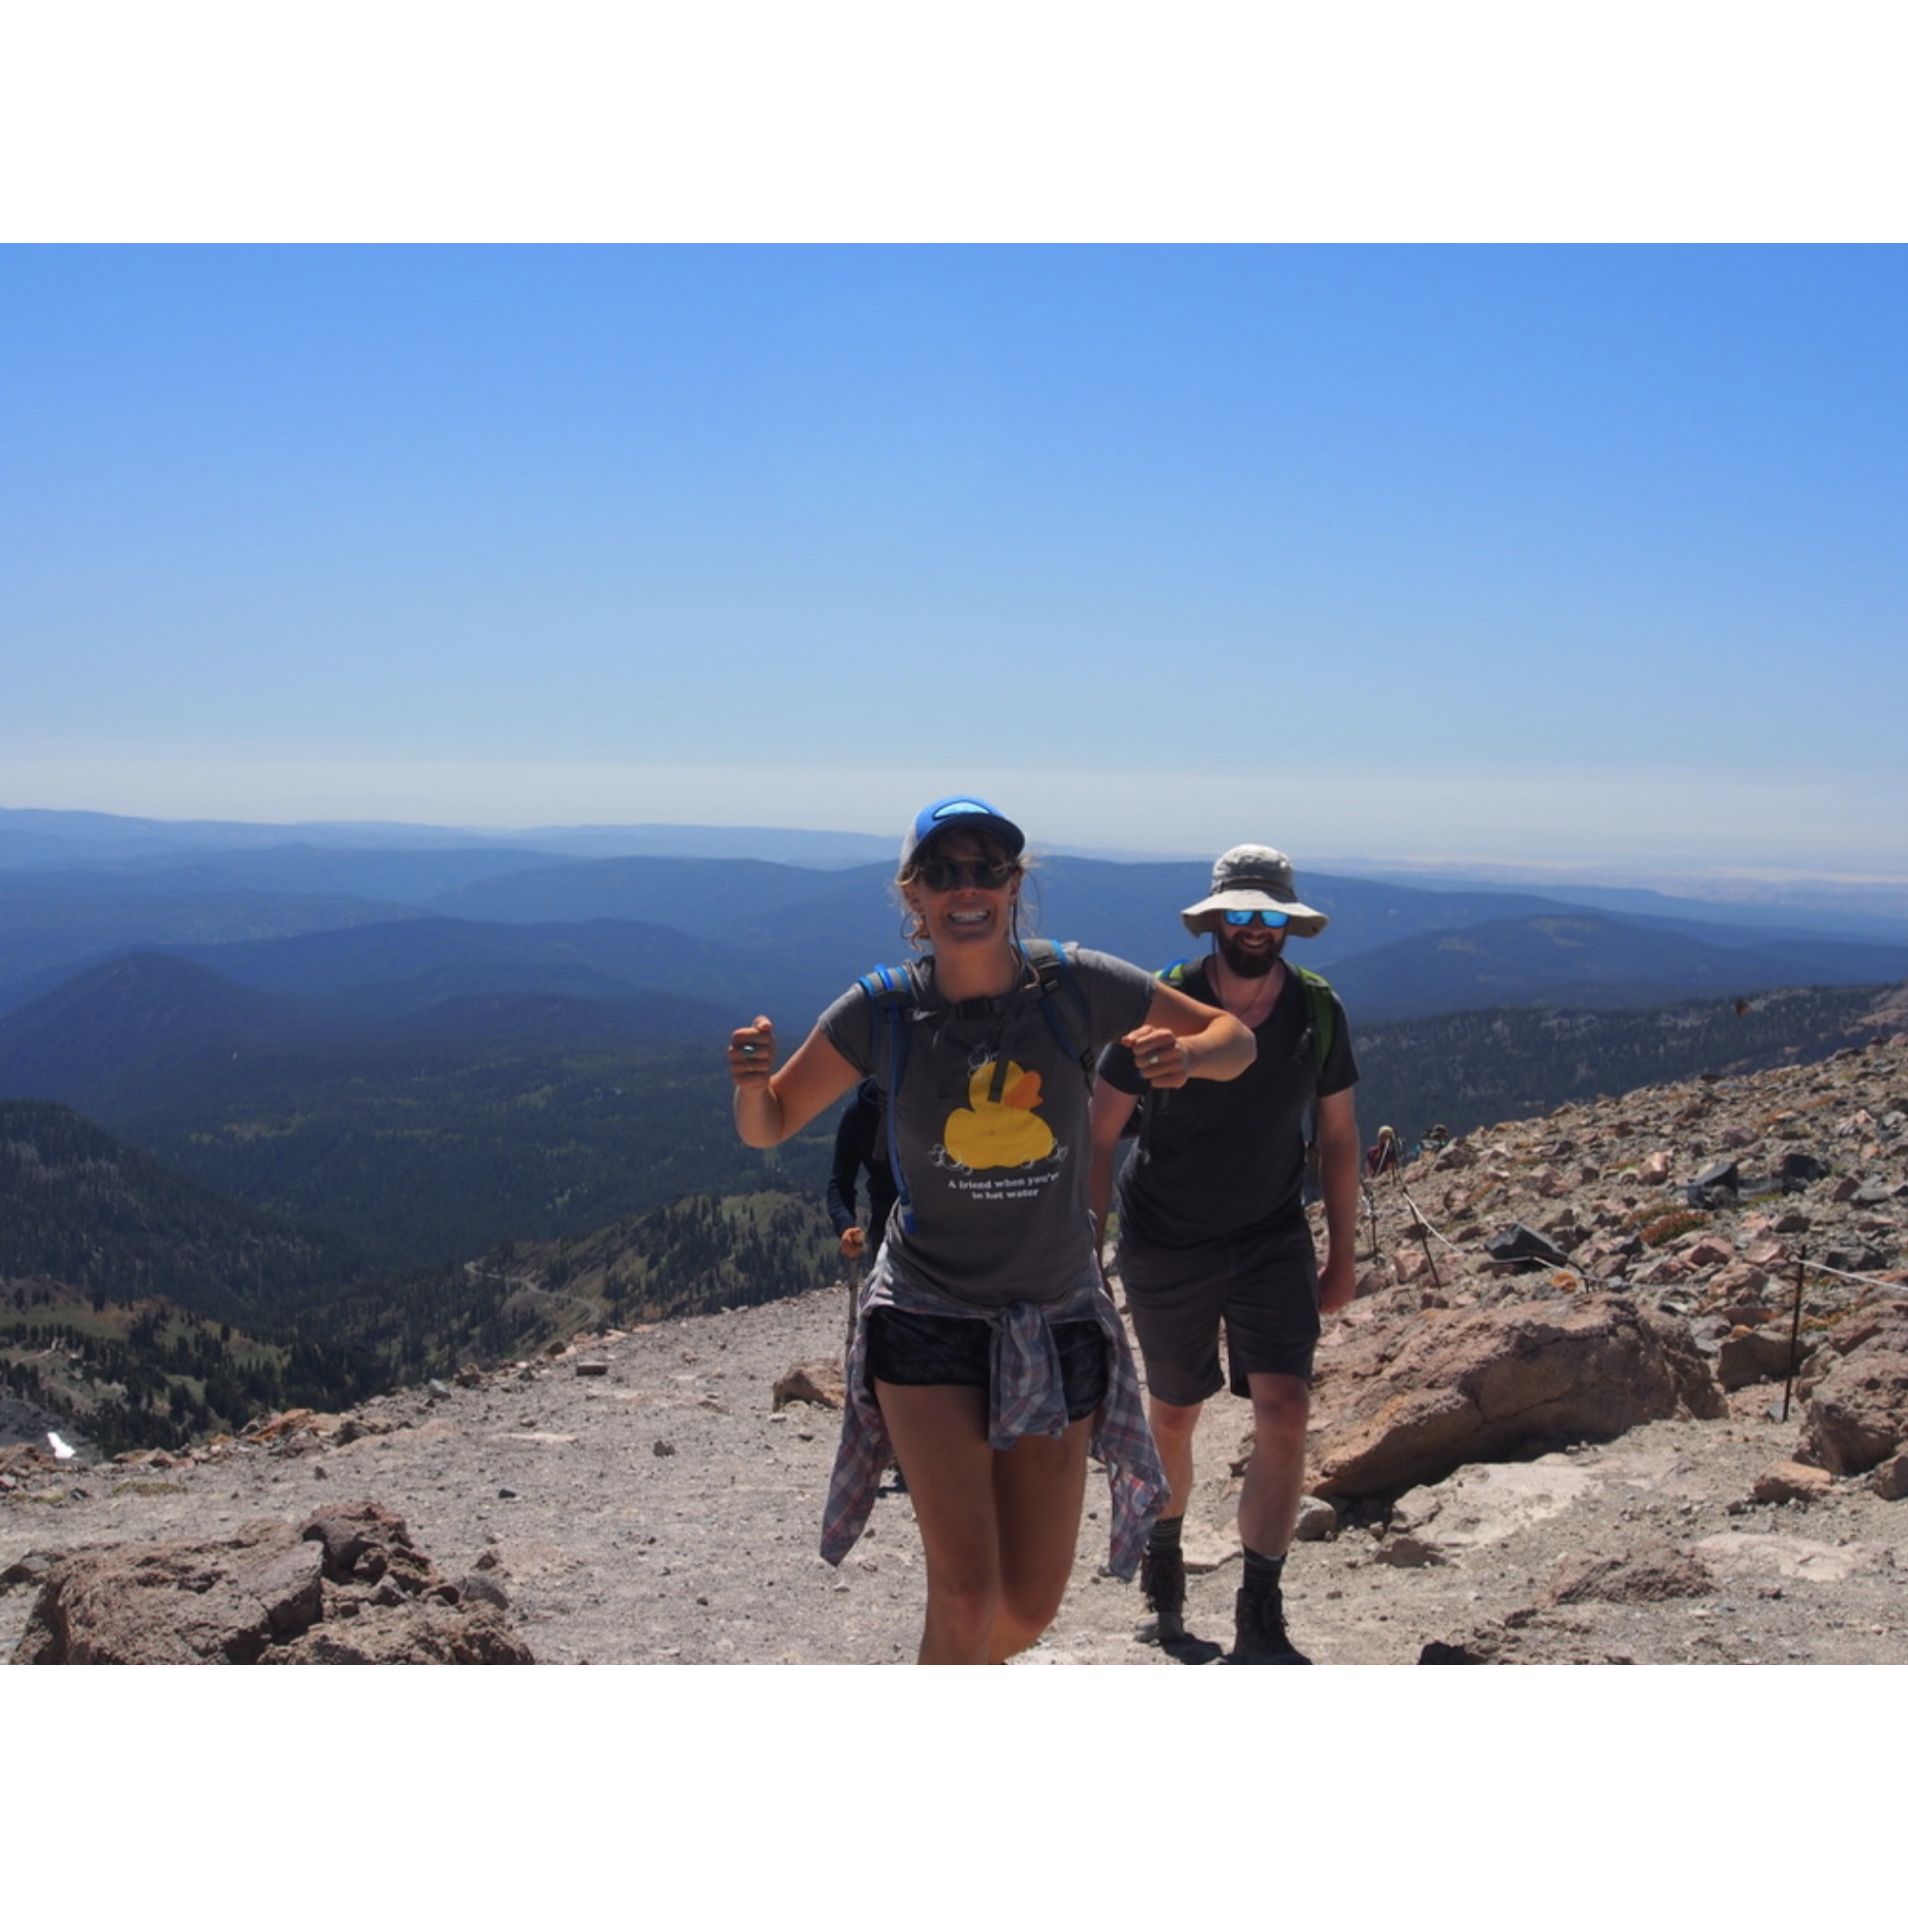 Hiking to the top of Mount Lassen. Nimbus carrying a surprise engagement ring. Rachel pretending she's not afraid of heights.